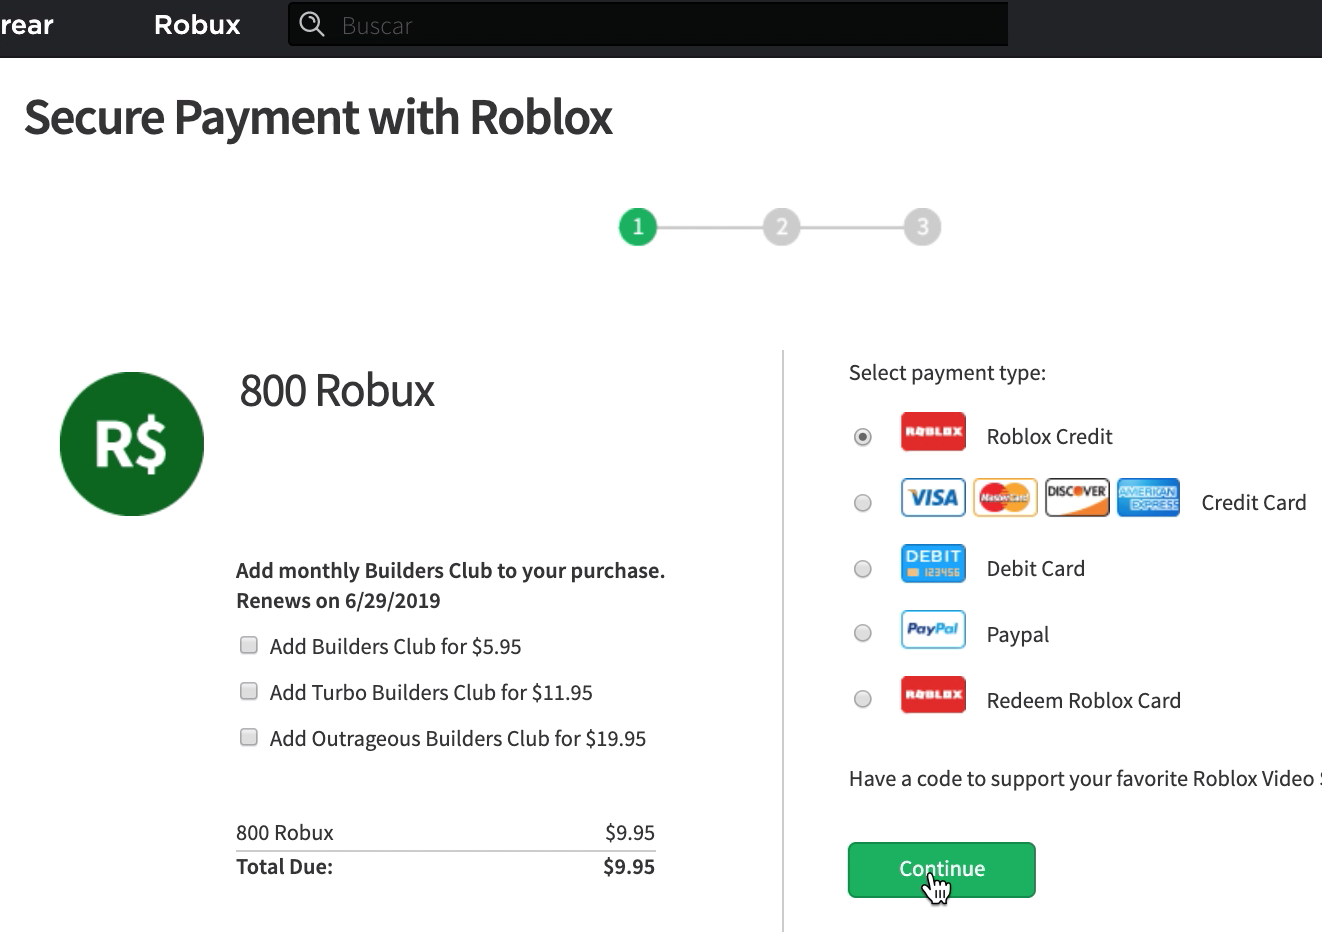 Pin Roblox Card How To Get Free Robux Codes 2019 February - como conseguir 70 robux gratis robux codes xyz